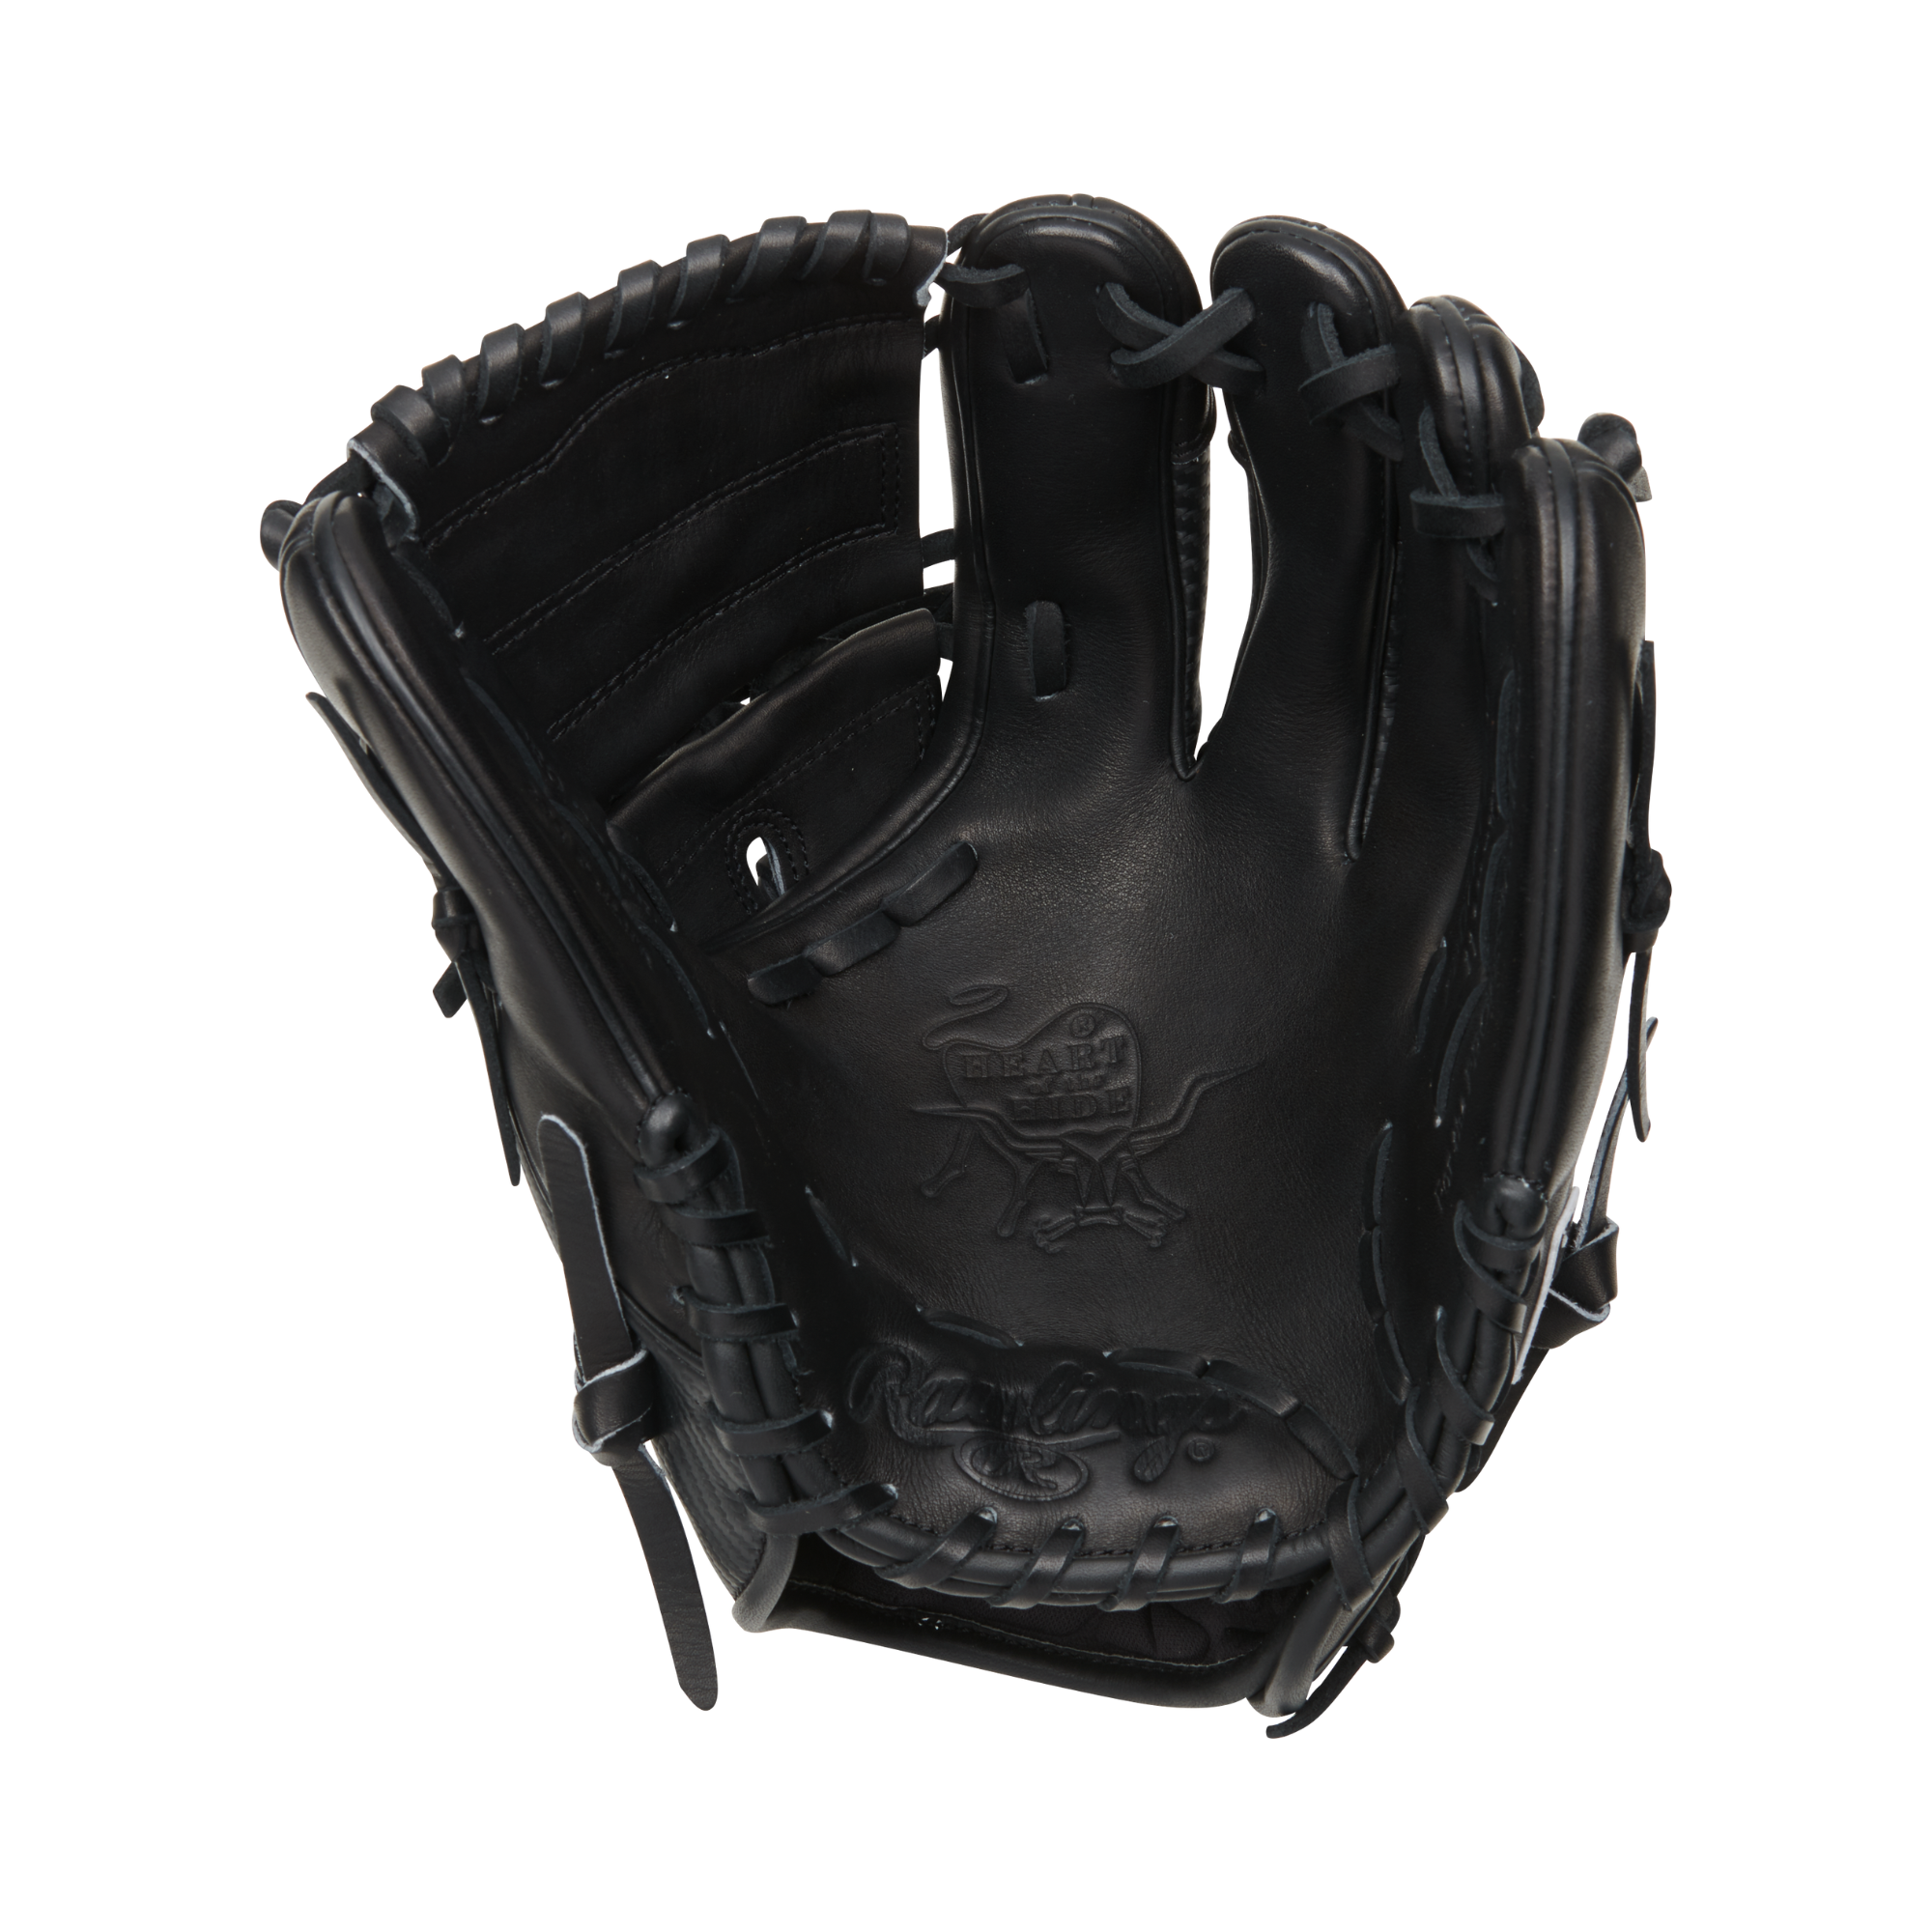 Rawlings Heart of the Hide Hyper Shell Infield/Pitcher's Glove RHT 11.75"